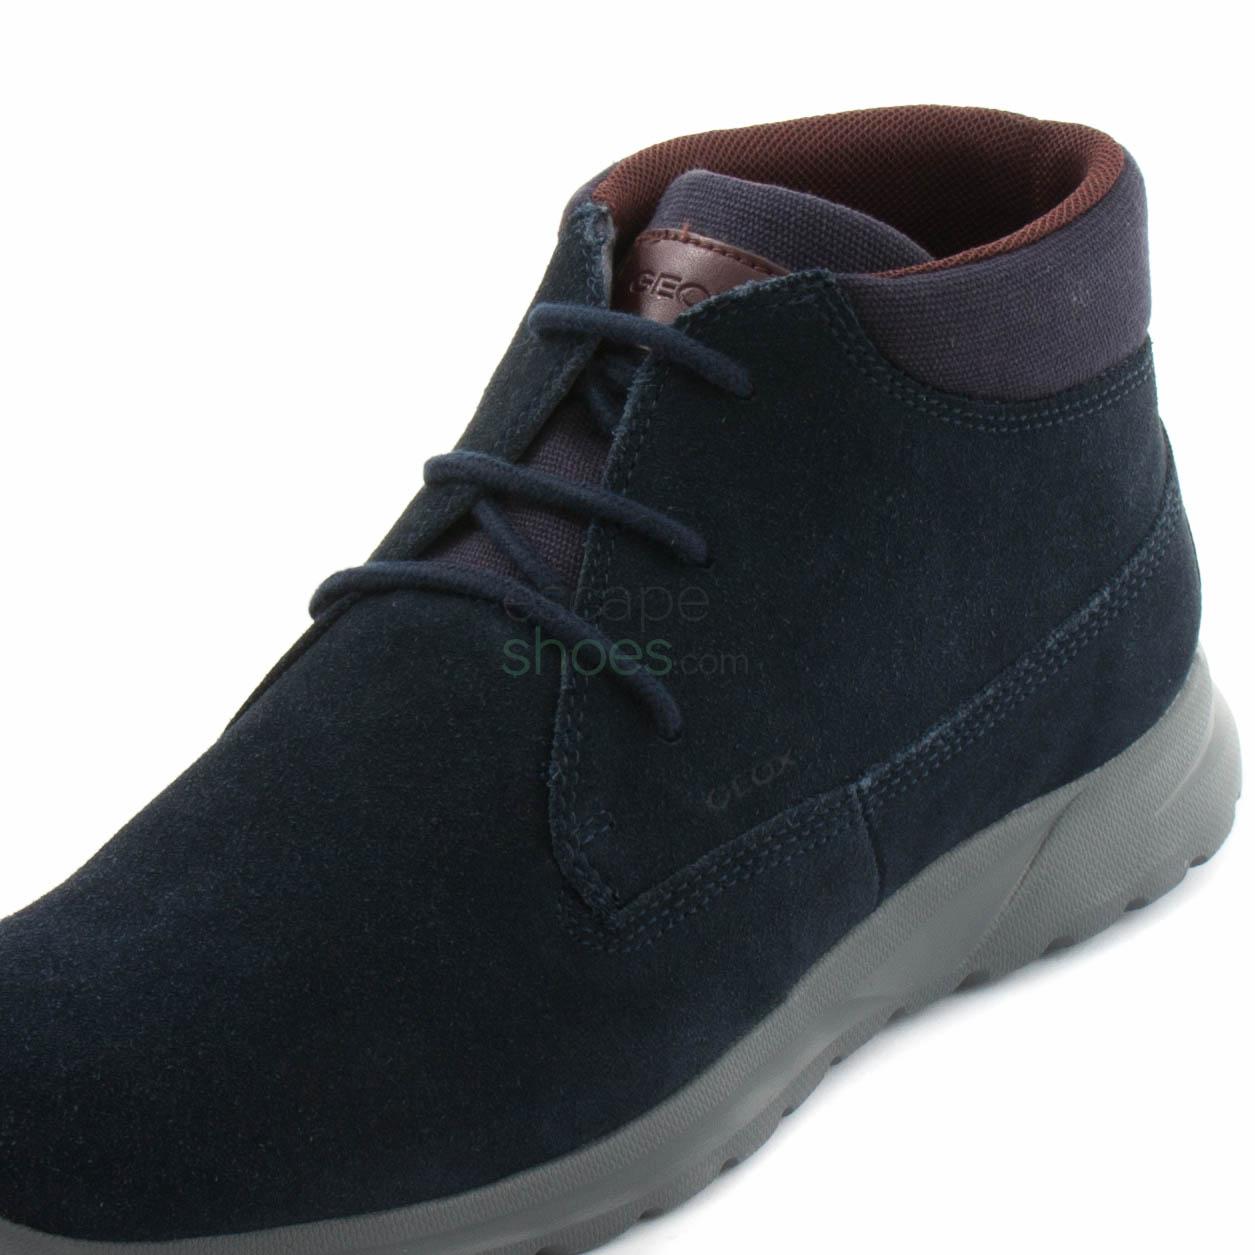 Boots GEOX Damian Navy